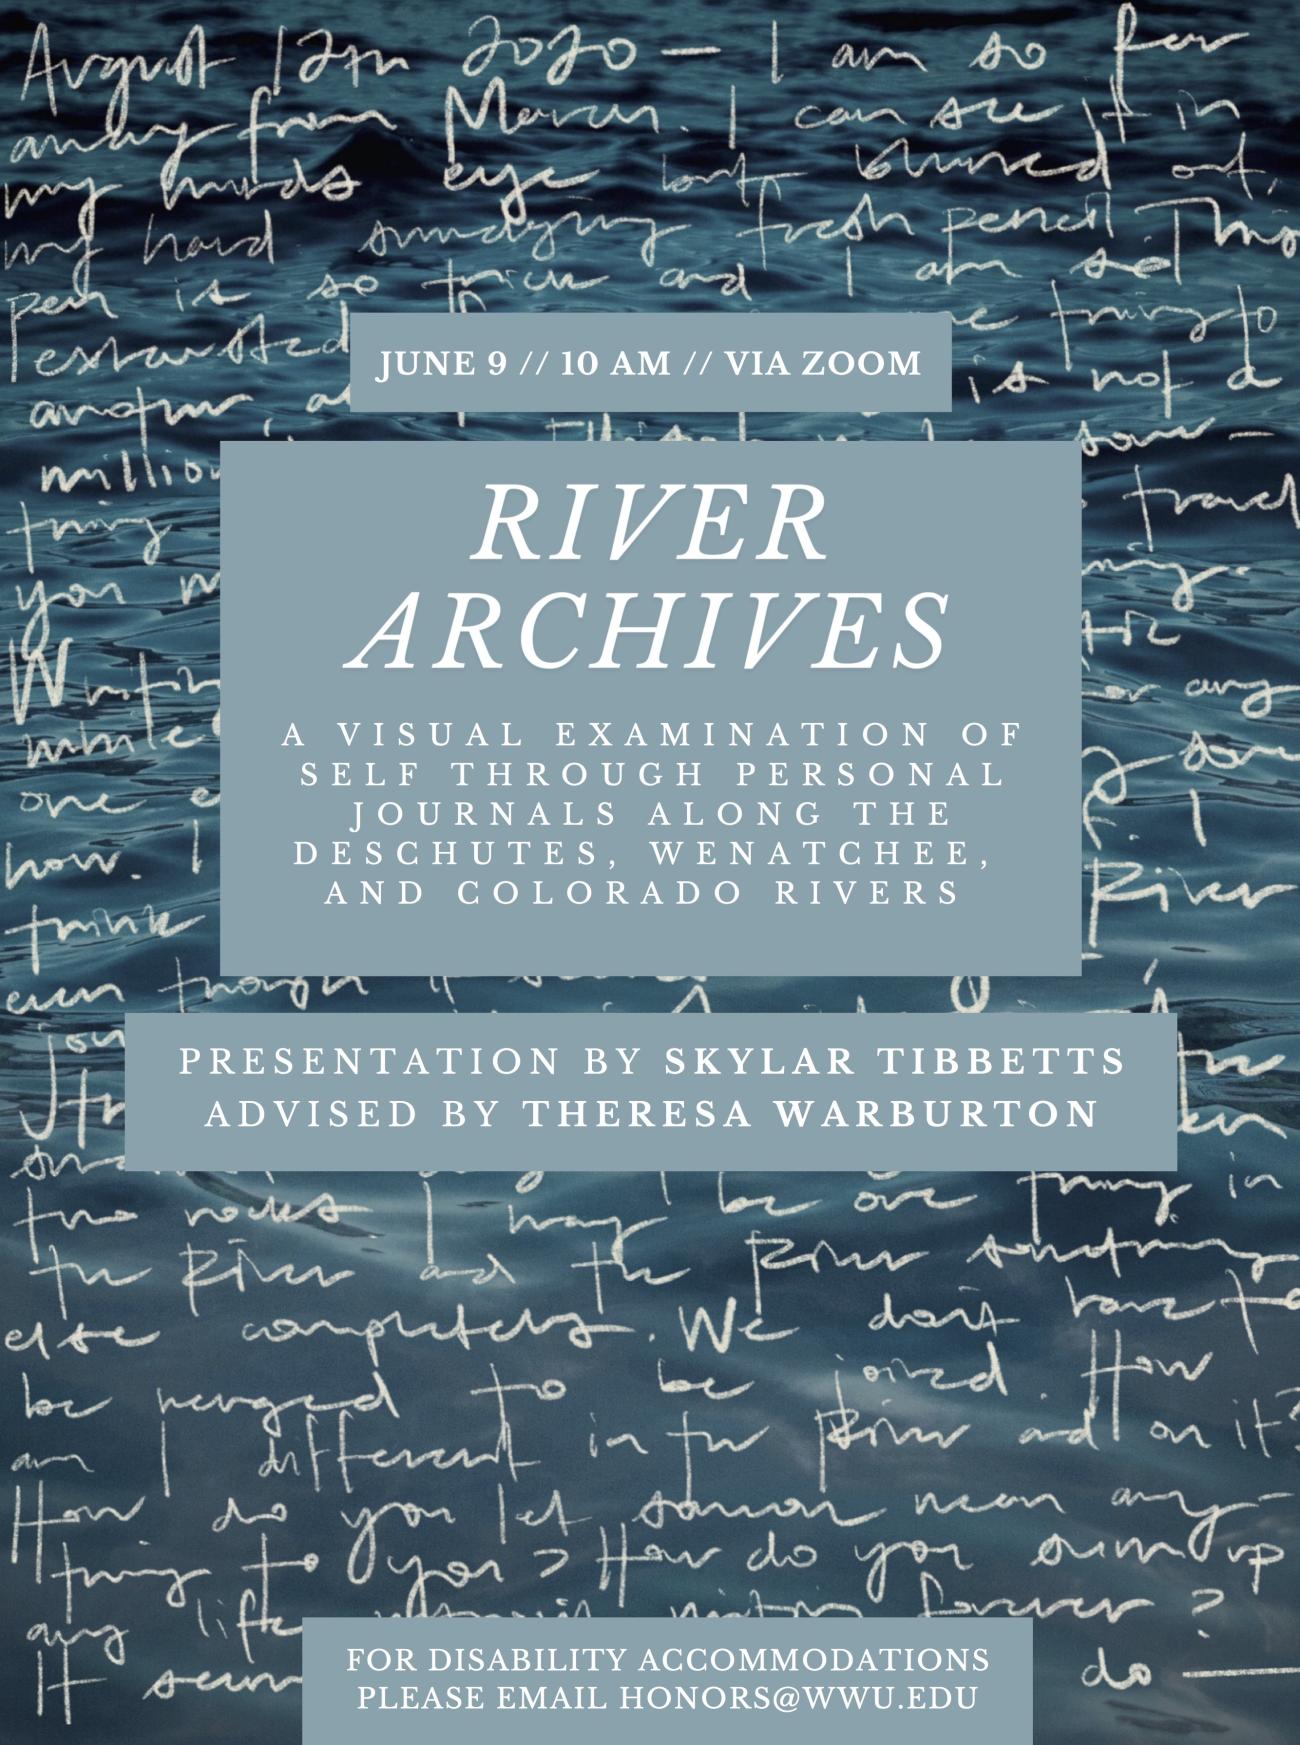 Background of dark blue waves with journal entry handwritten over it in white. Text reads: "River Archives: A Visual Examination of Self Through Personal Journals Along the Deschutes, Wenatchee, and Colorado Rivers. Presentation by Skylar Tibbets. Advised by Theresa Warburton. June 9, 10 AM, via Zoom. For disability accommodations please email Honors@wwu.edu".